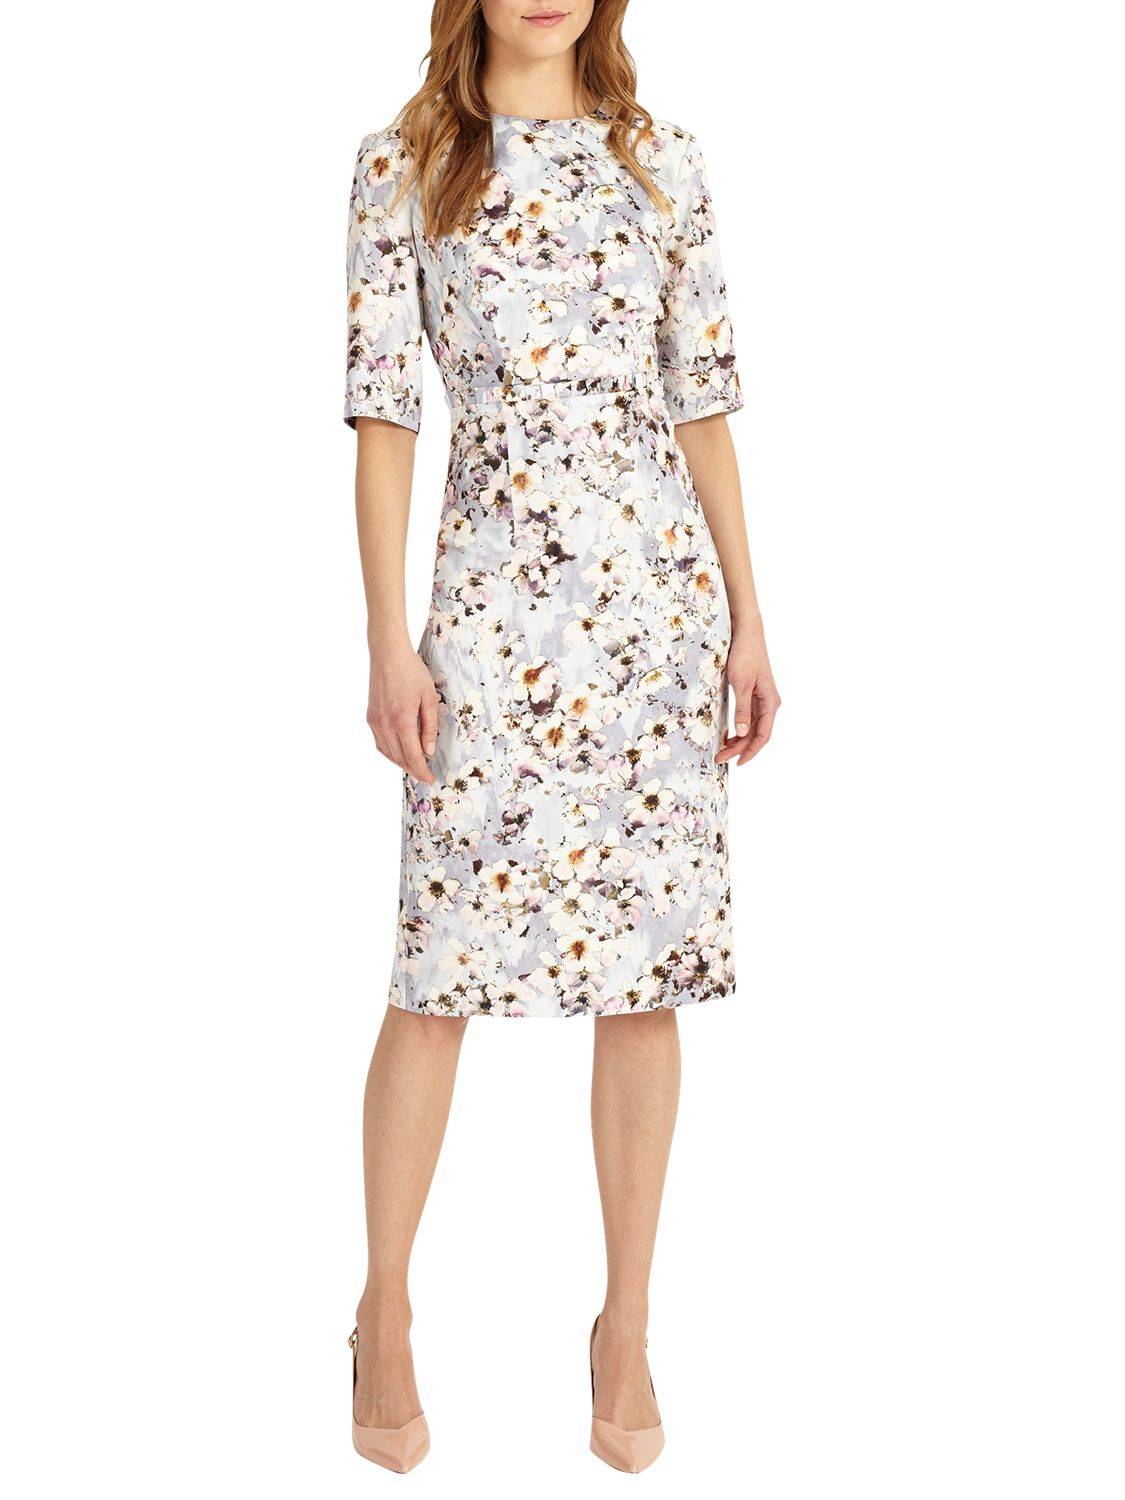 Phase Eight Ember Floral Print Dress, Mineral, 6